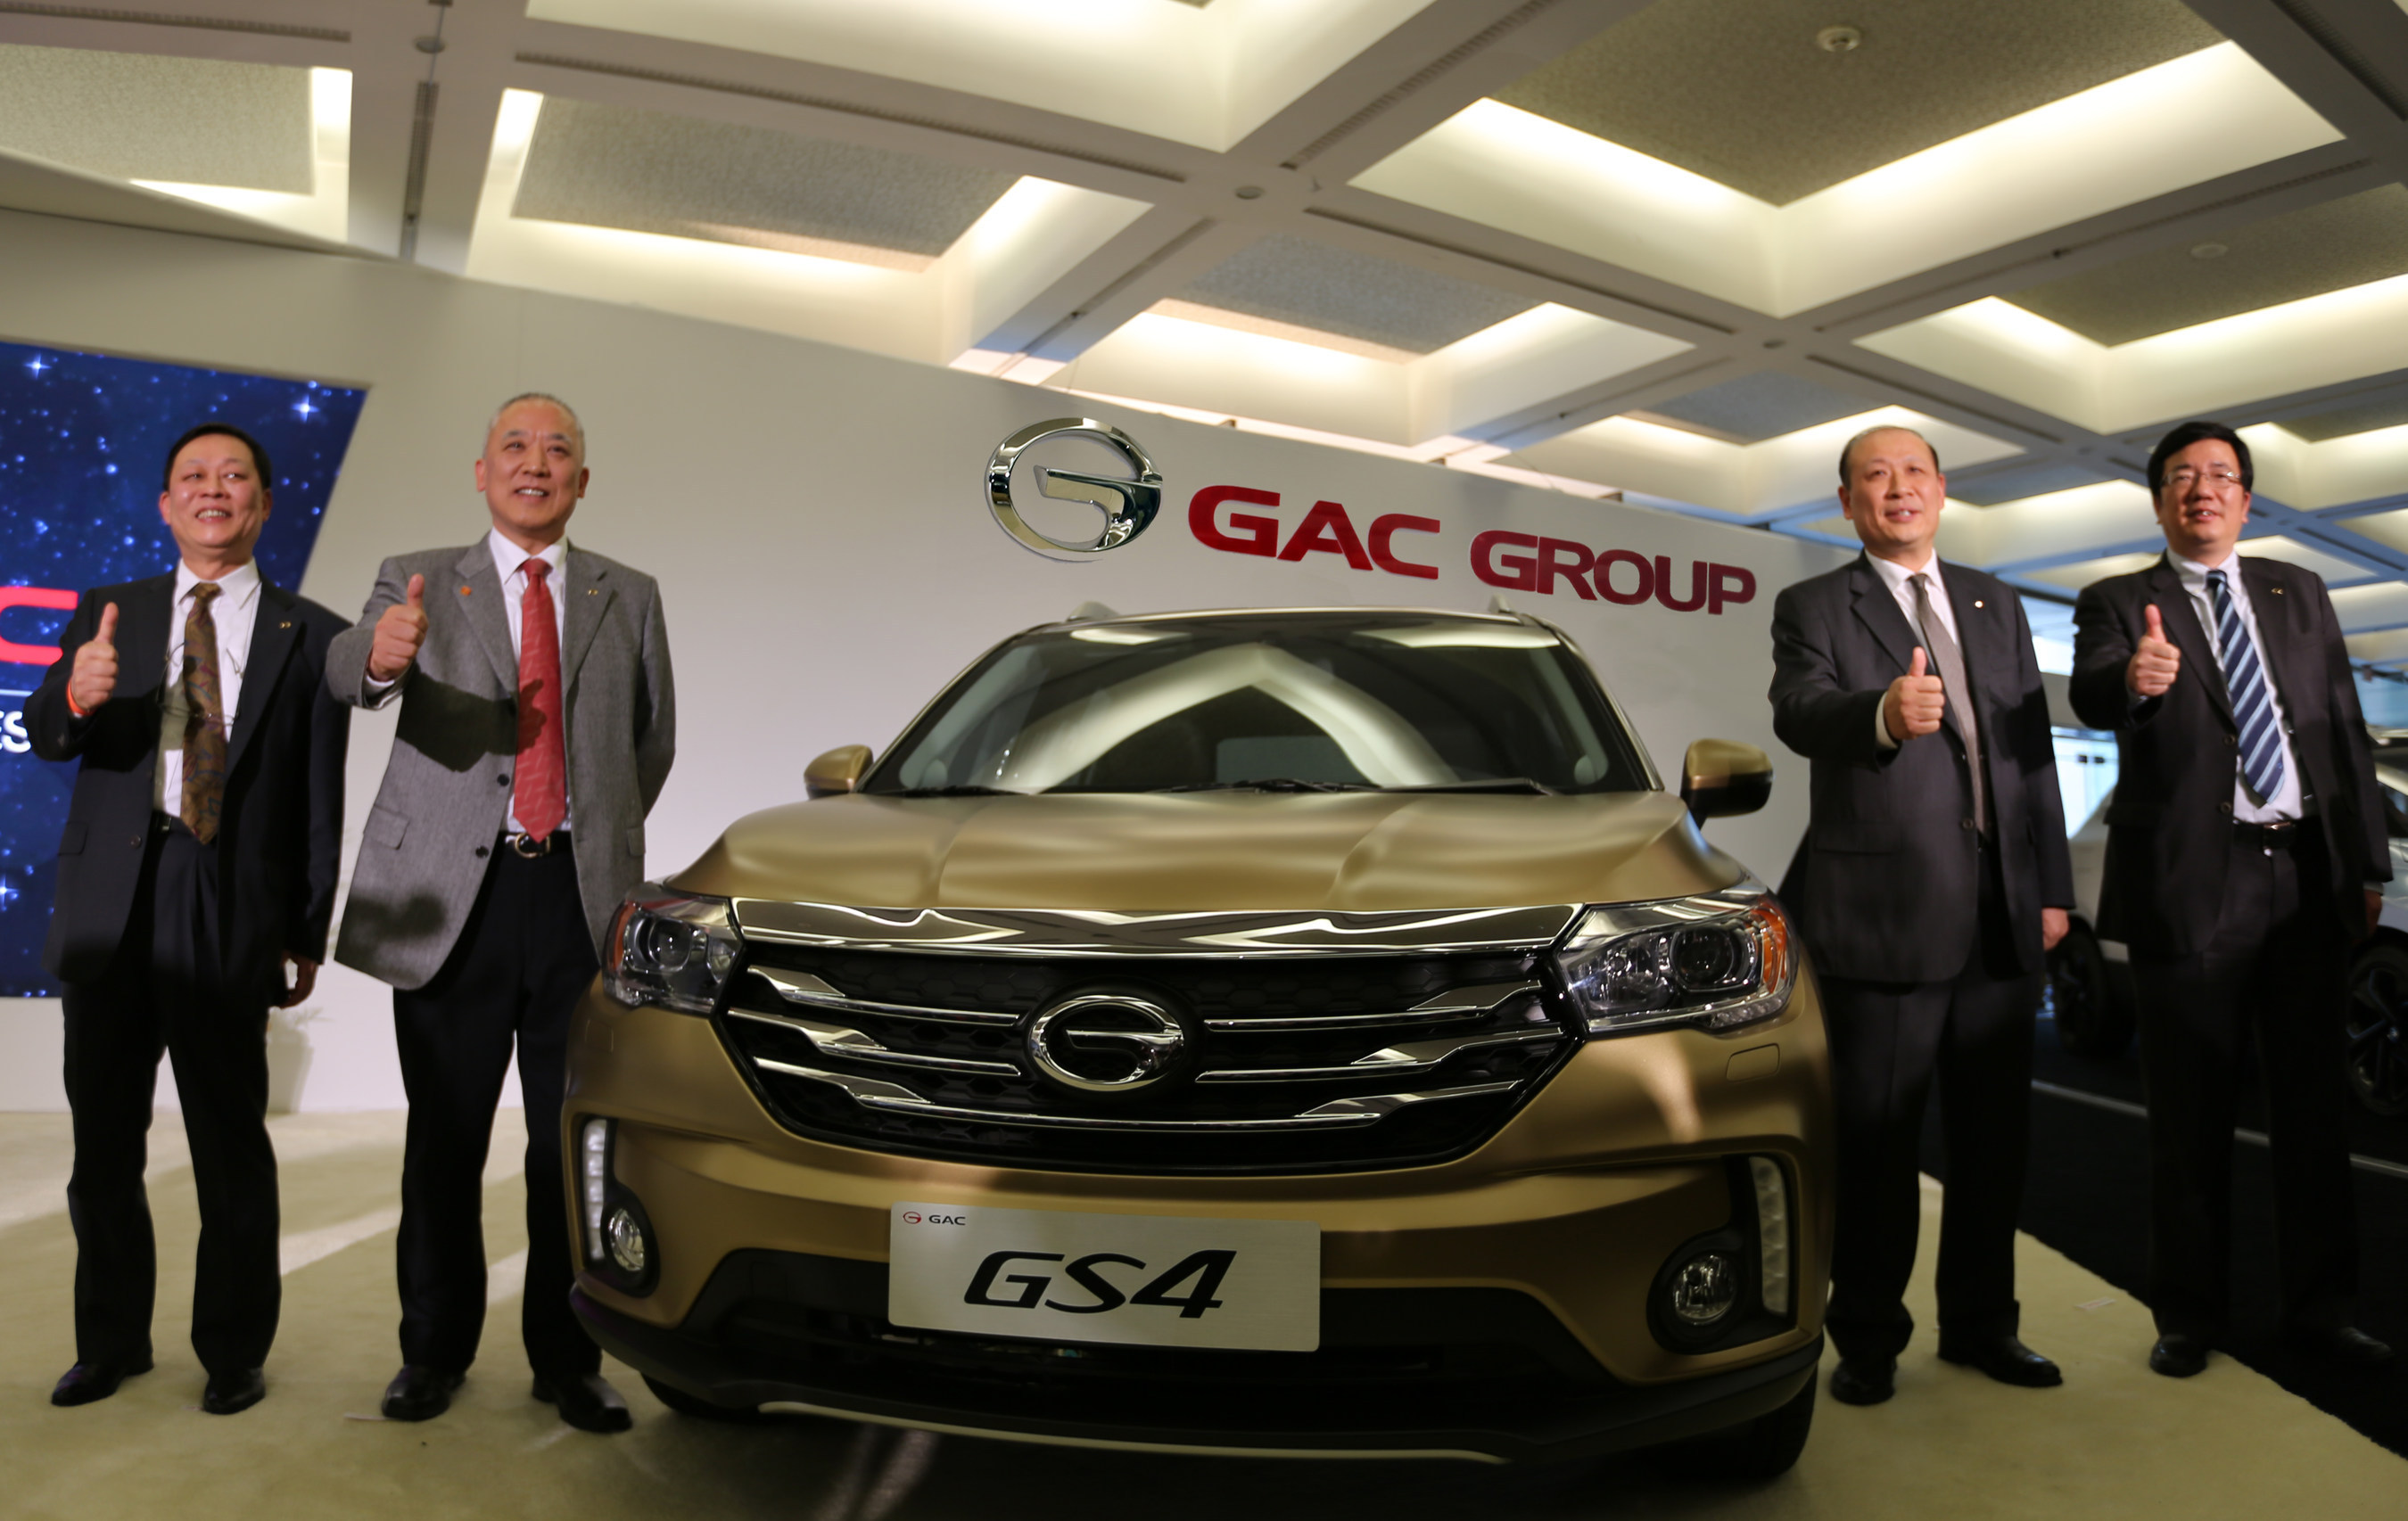 (From left to right) Huang Xiangdong, President of GAC Engineering, Yuan Zhongrong, Vice Chairman of GAC Group, Zhang Qingsong, Vice President of GAC Group, and Wu Song , General Manager of GAC Motor.